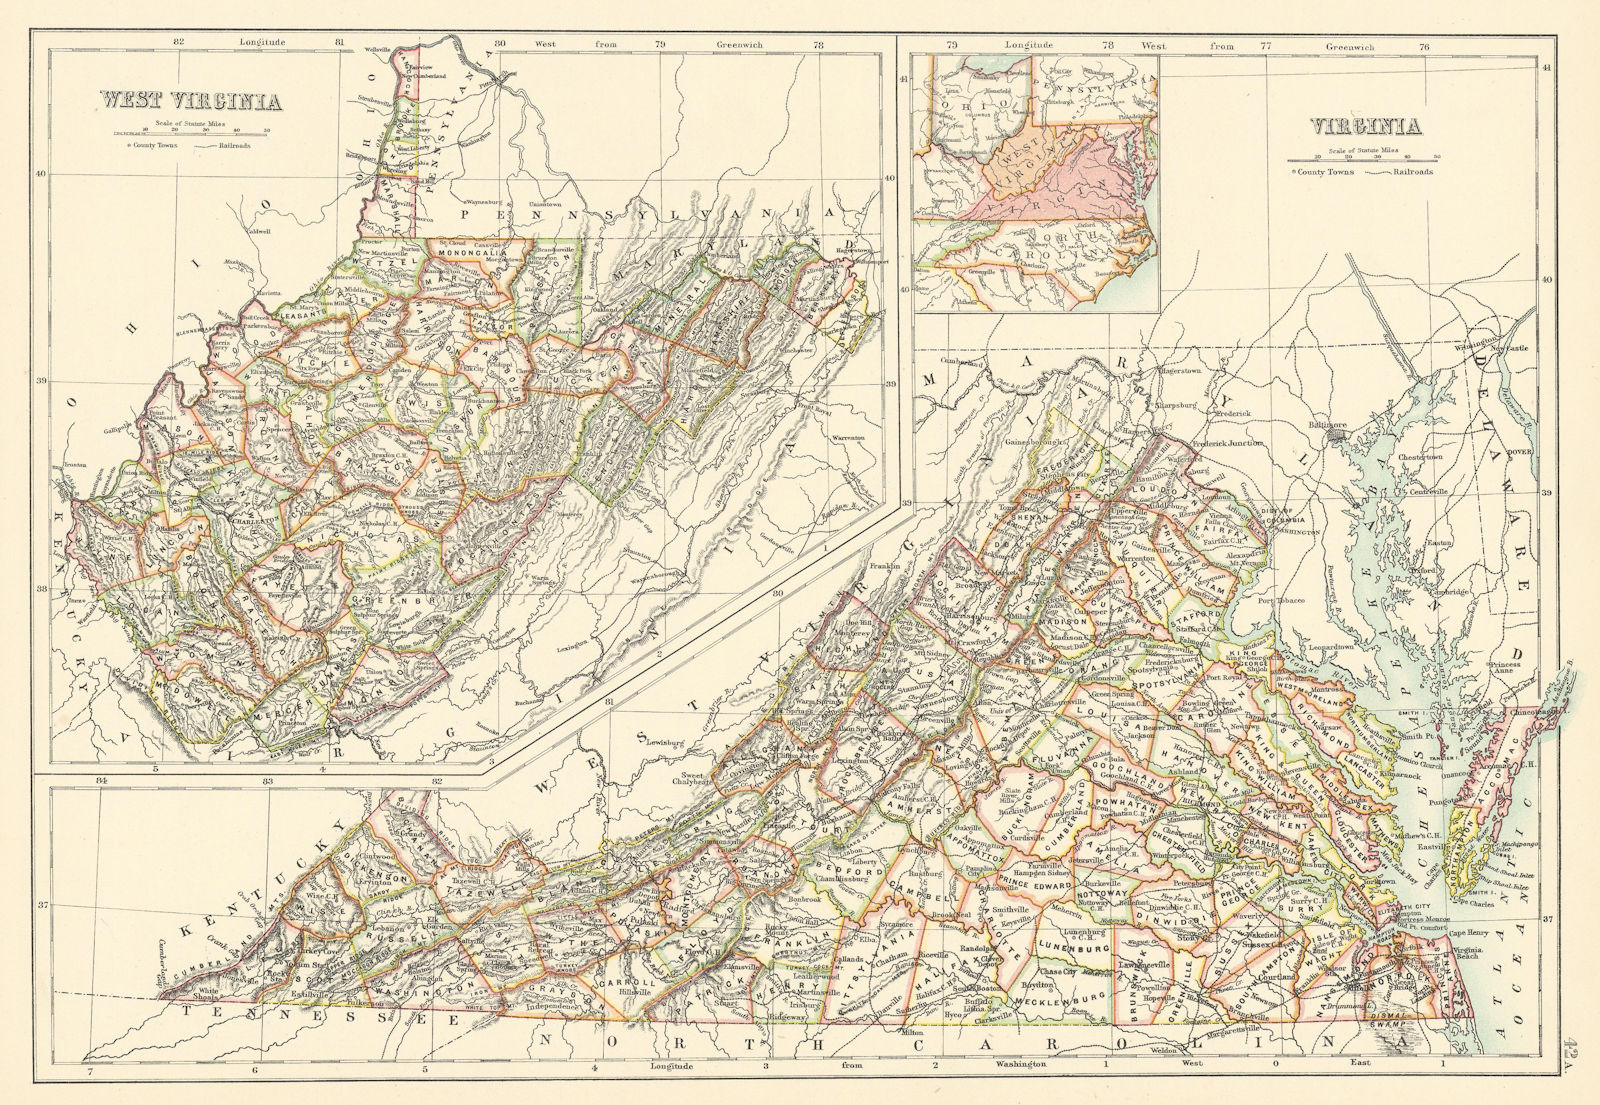 Virginia and West Virginia state maps showing counties. BARTHOLOMEW 1898